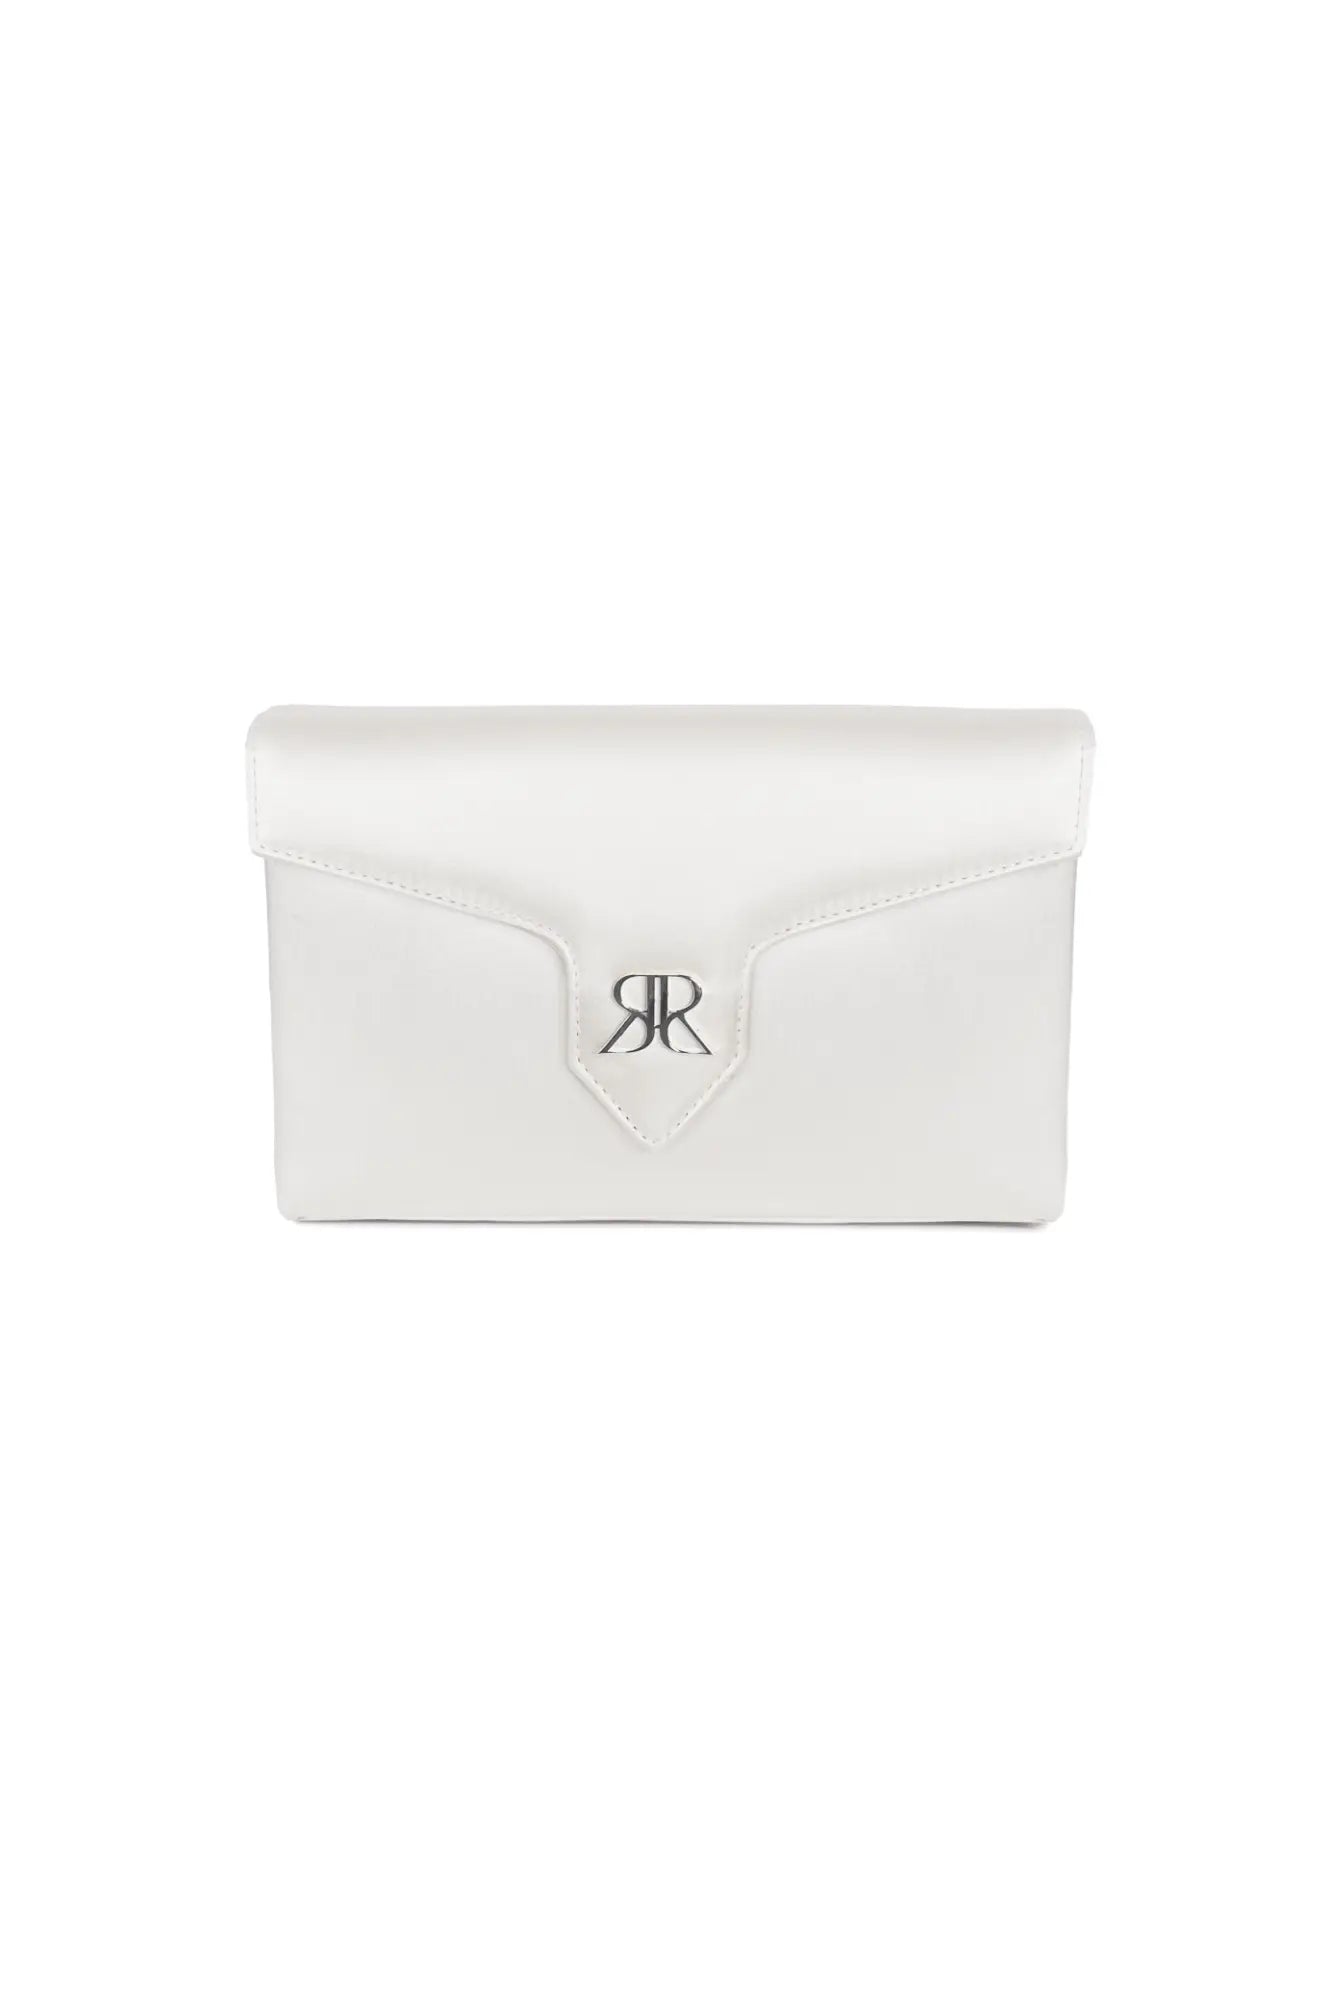 Love Note Envelope Clutch Ivory from The Bella Rosa Collection with a silver monogram clasp on a white background.